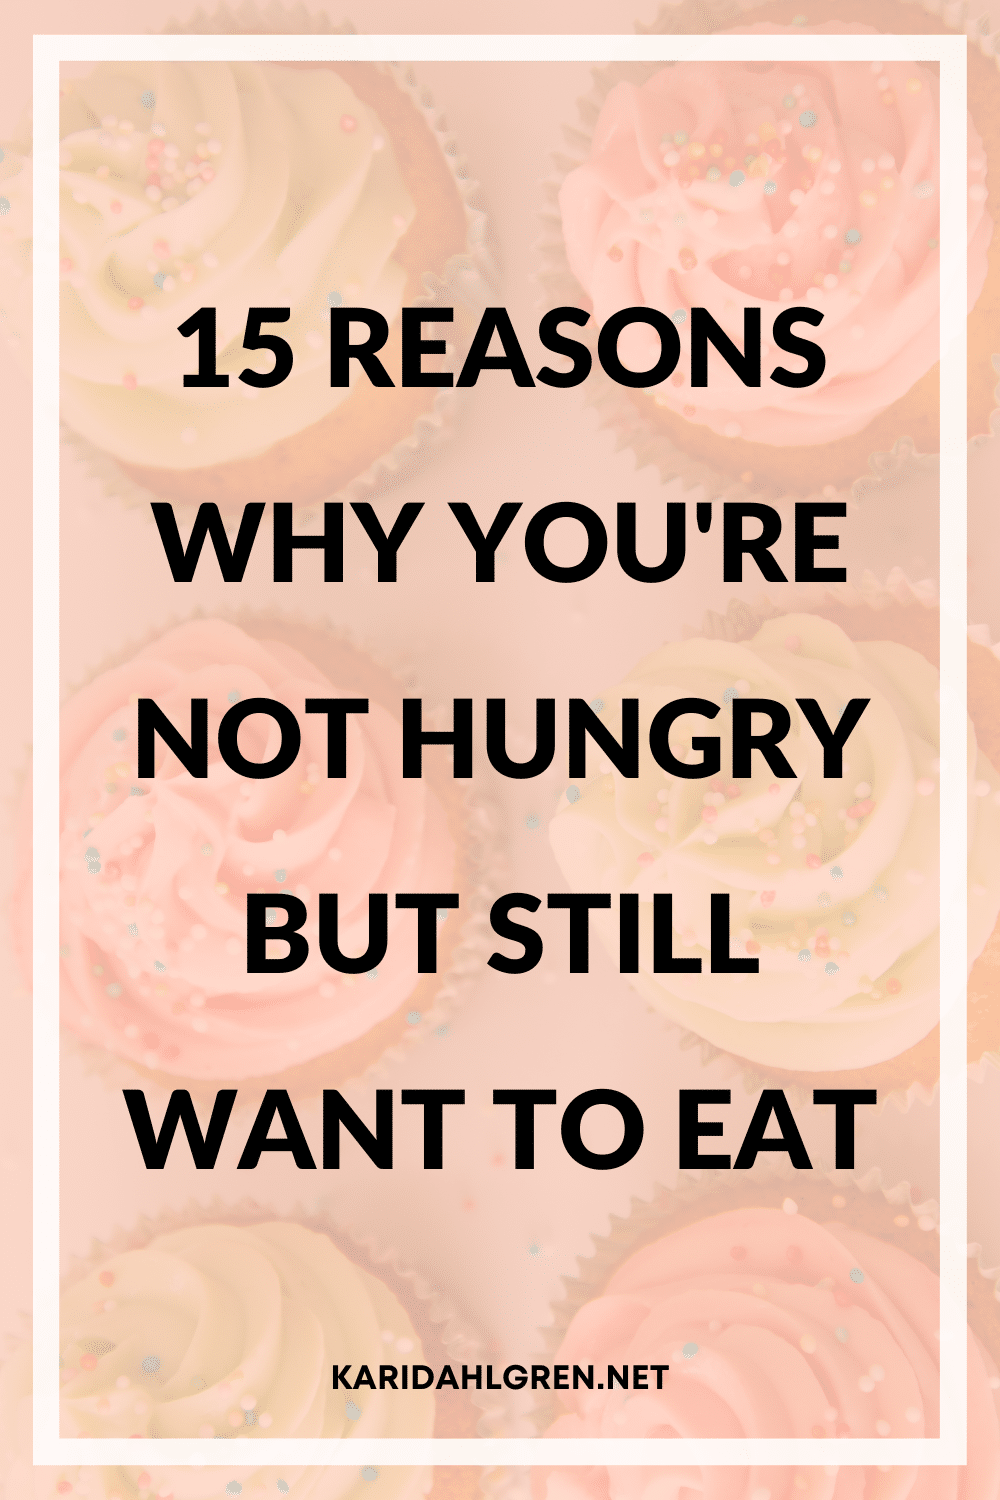 15 reasons why you're not hungry but still want to eat